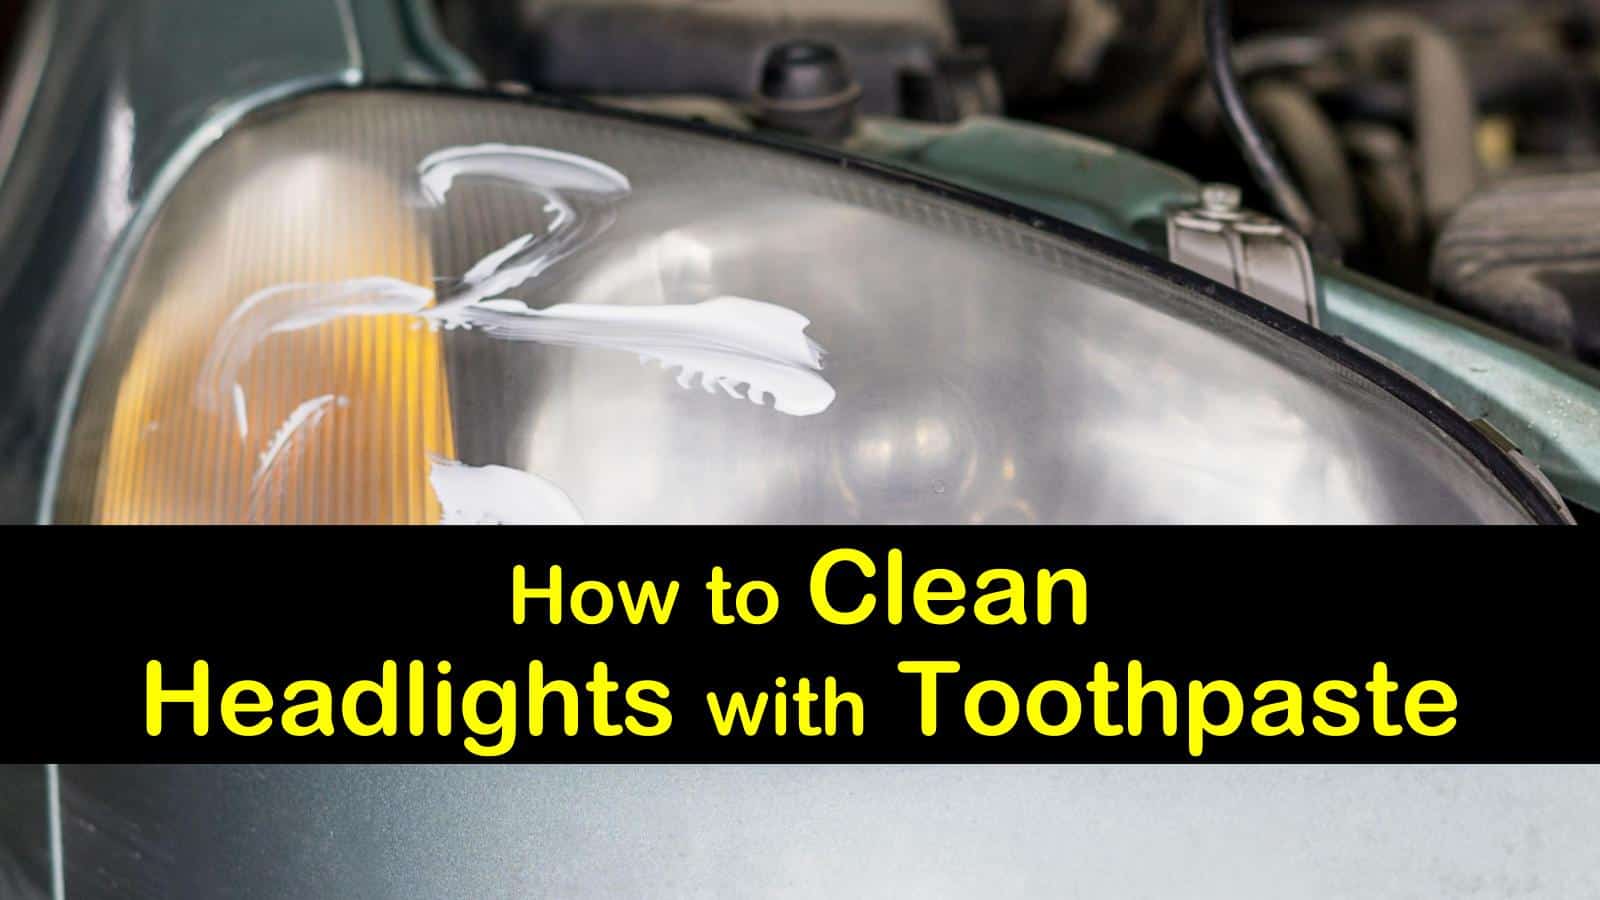 5 Hands-On Ways to Clean Headlights with Toothpaste